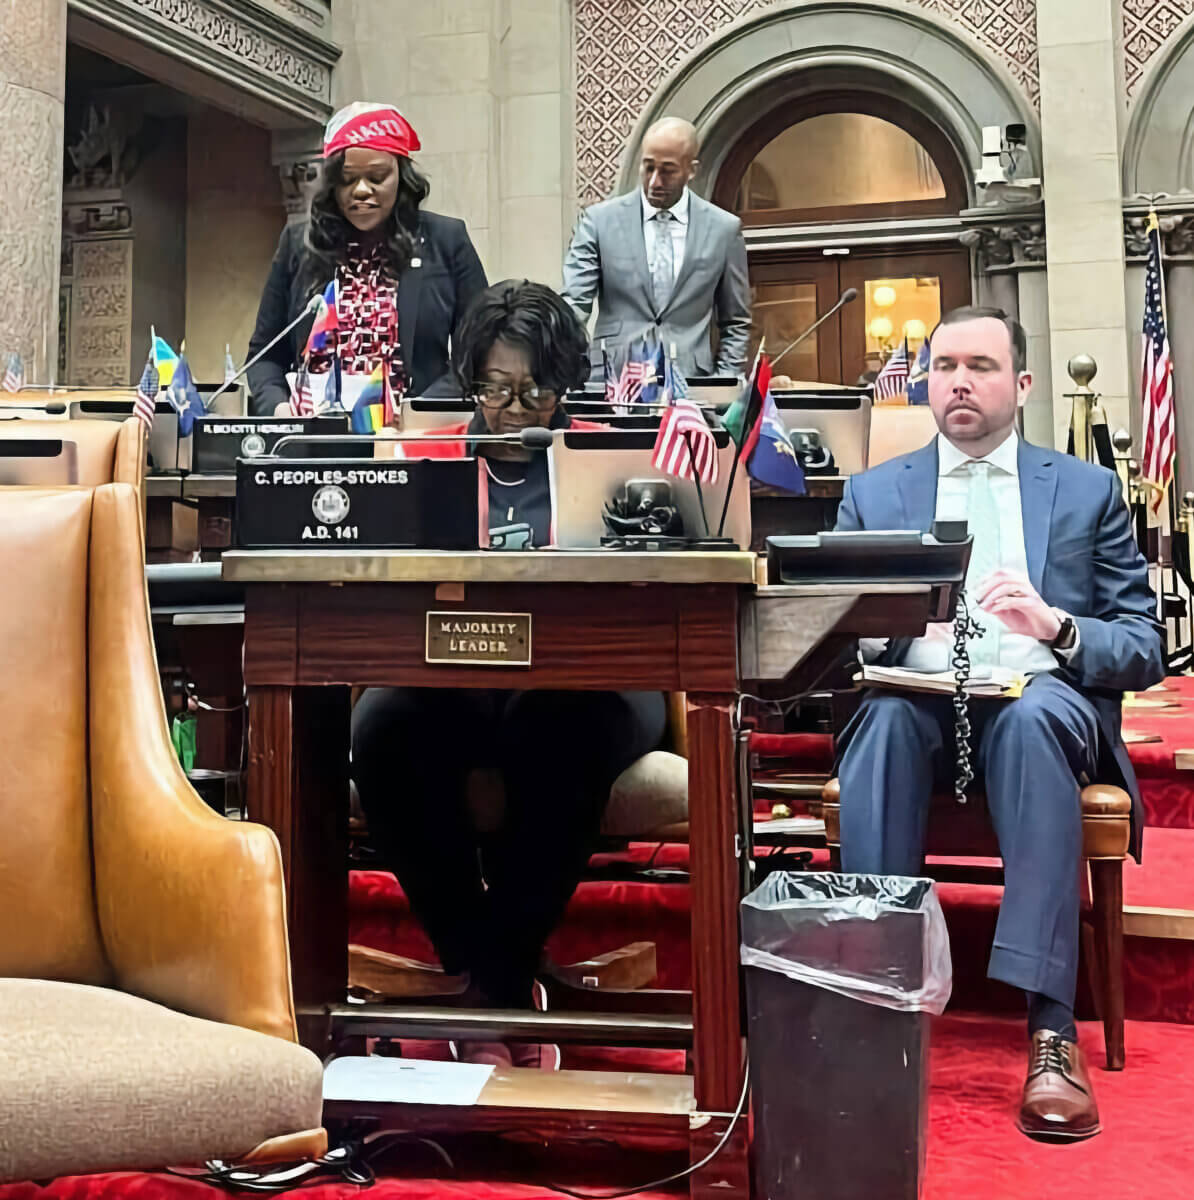 Assemblymember Bichotte Hermelyn speaking on Haitian Heritage Month at the NYS Assembly, with Assembly Majority Leader Crystal D. Peoples-Stokes and Assemblymember Clyde Vanel [a fellow Haitian-American lawmaker].